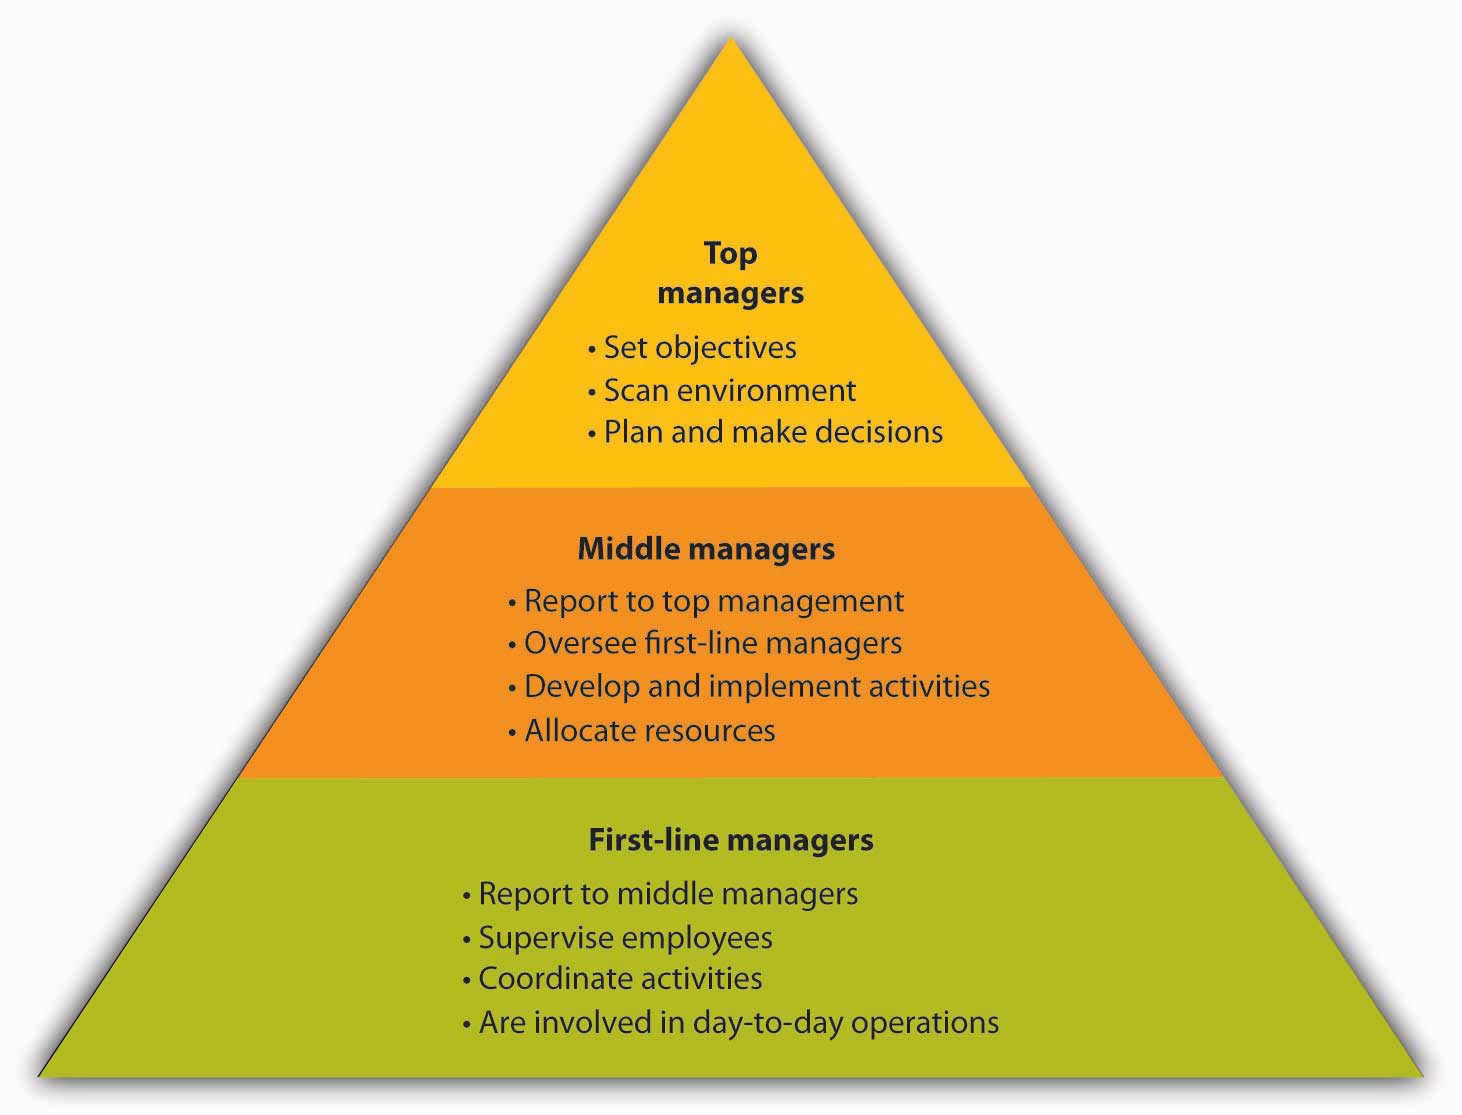 Levels of Management: Top managers: set objectives, scan environment, plan and make decisions; Middle managers: report to top management, oversee first-line managers, develop and implement activities, allocate resources; First-line managers: report to middle managers, supervise employees, coordinate activities, are involved in day-to-day operations.